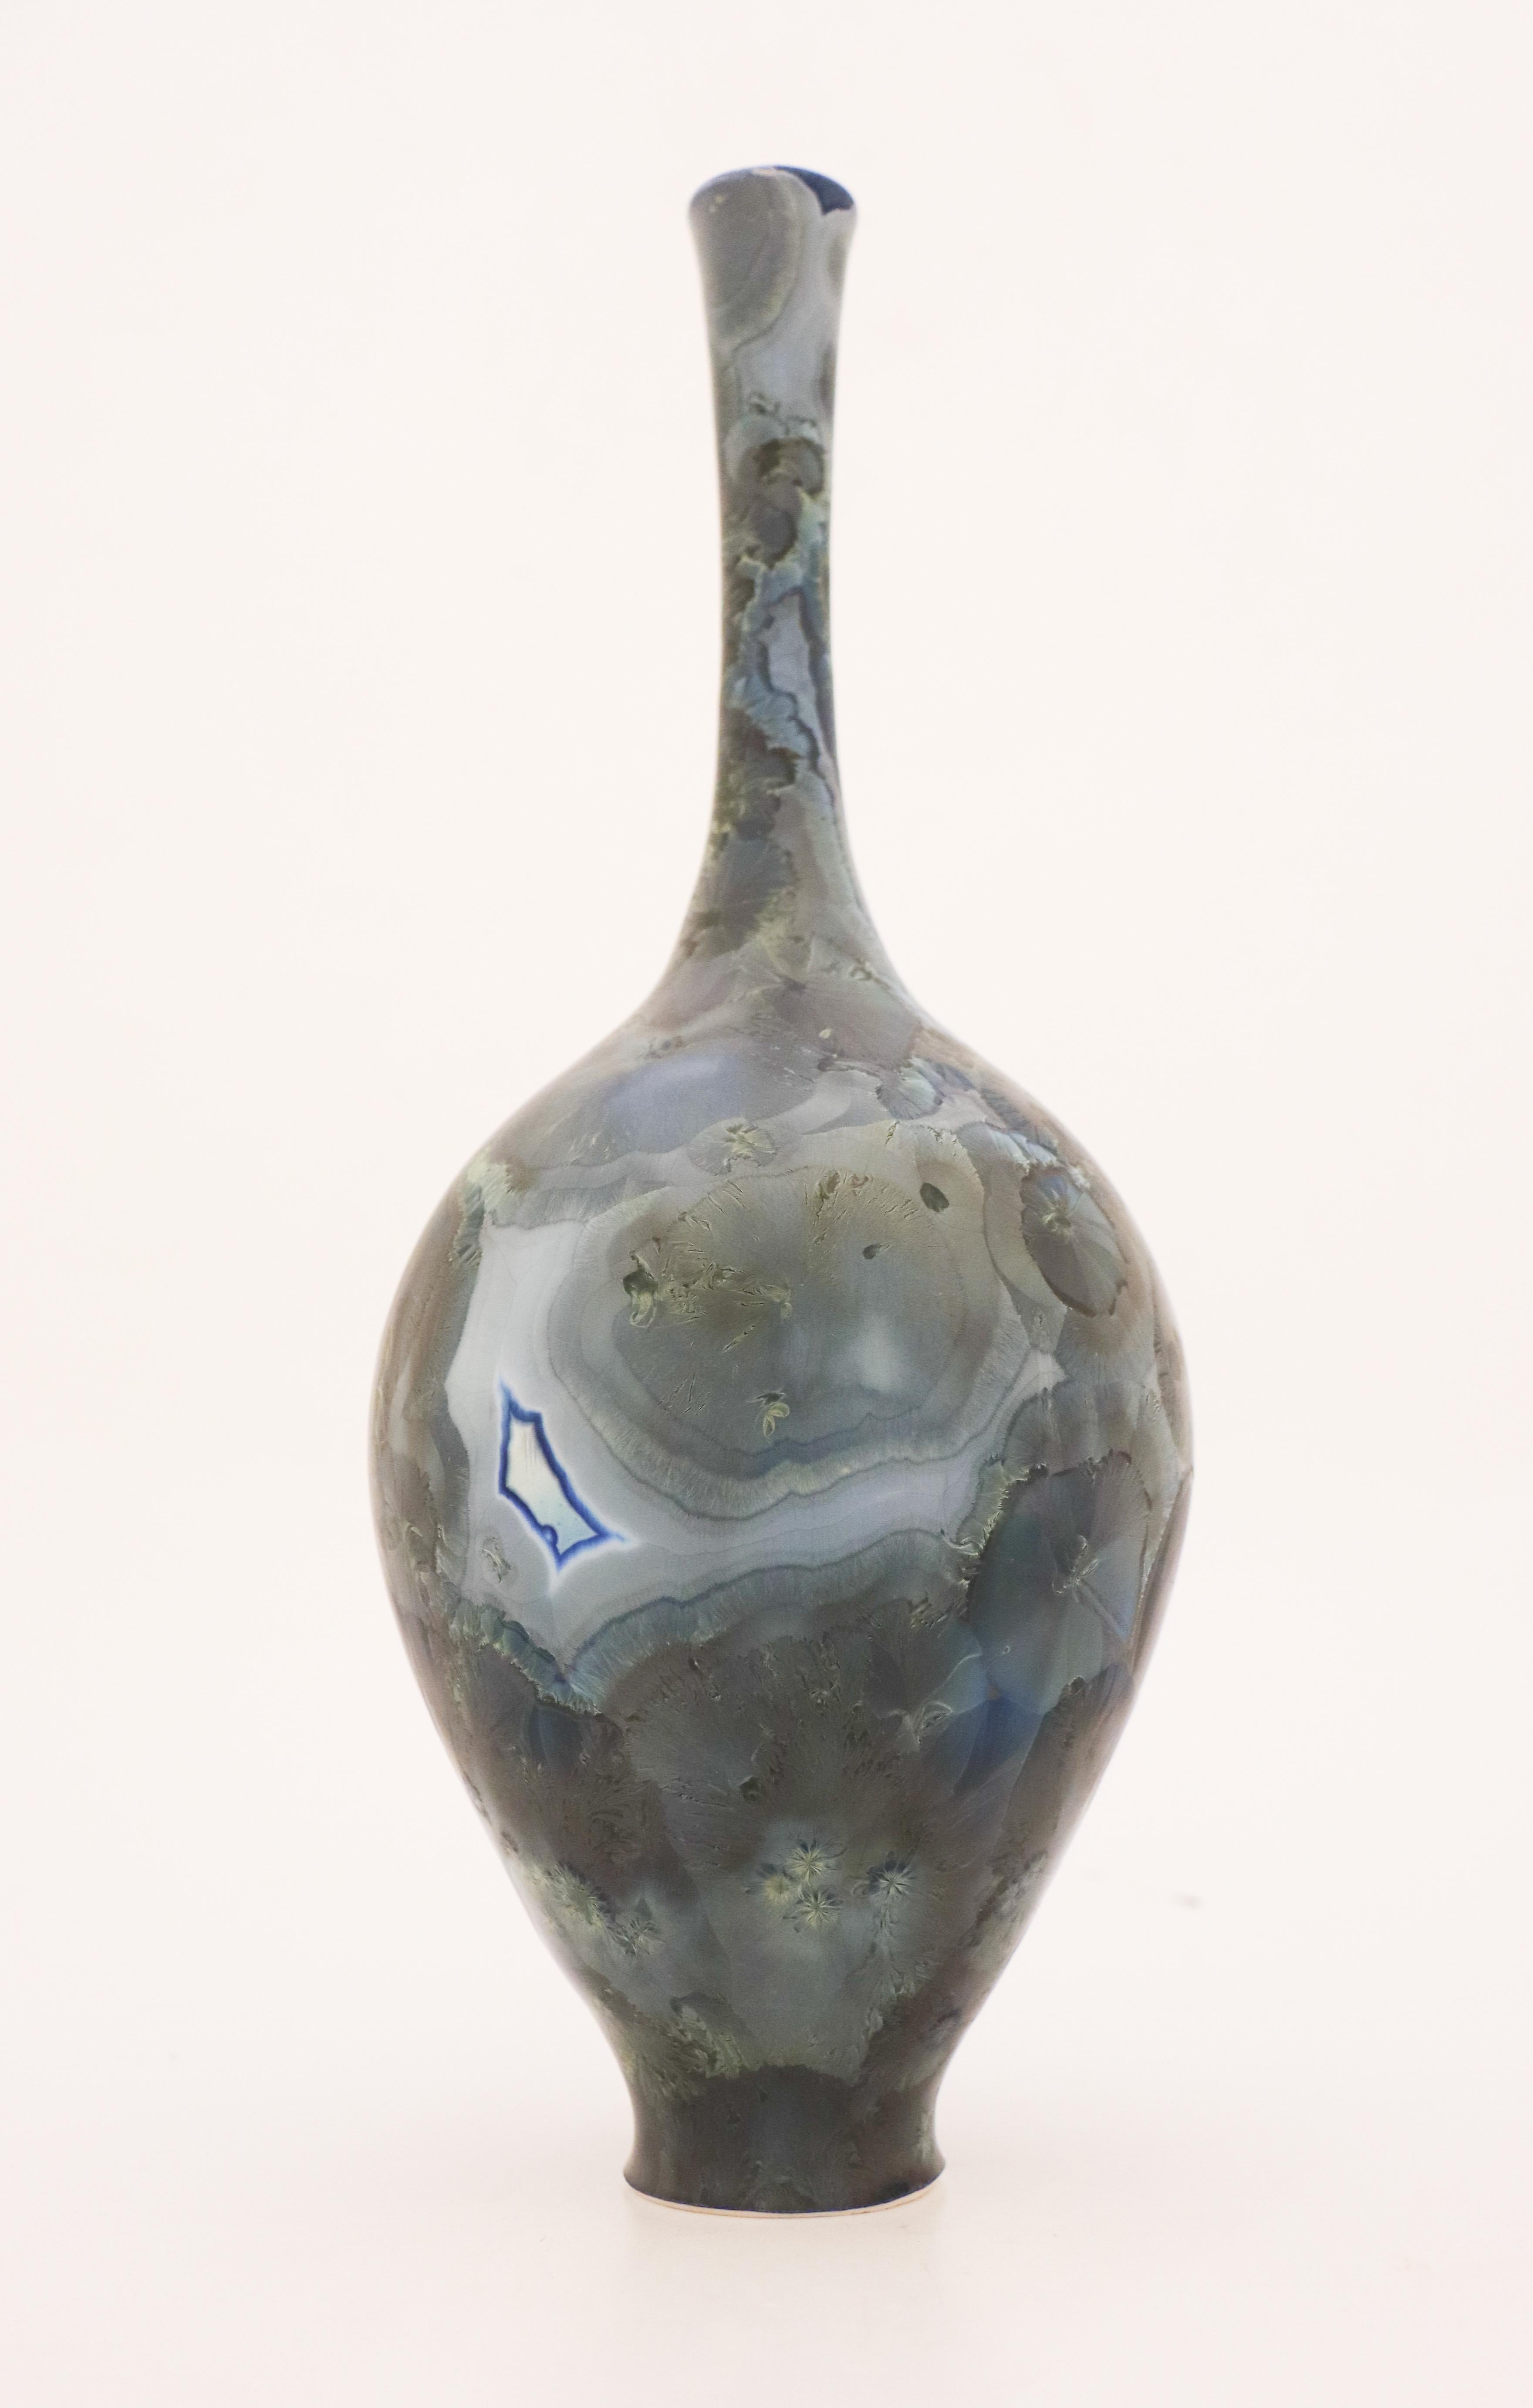 A unique vase in a Dark Green/Blue-tone with a lovely crystalline glaze created by the contemporary Swedish artist Isak Isaksson in his own studio. The vase is 34 cm (13.6